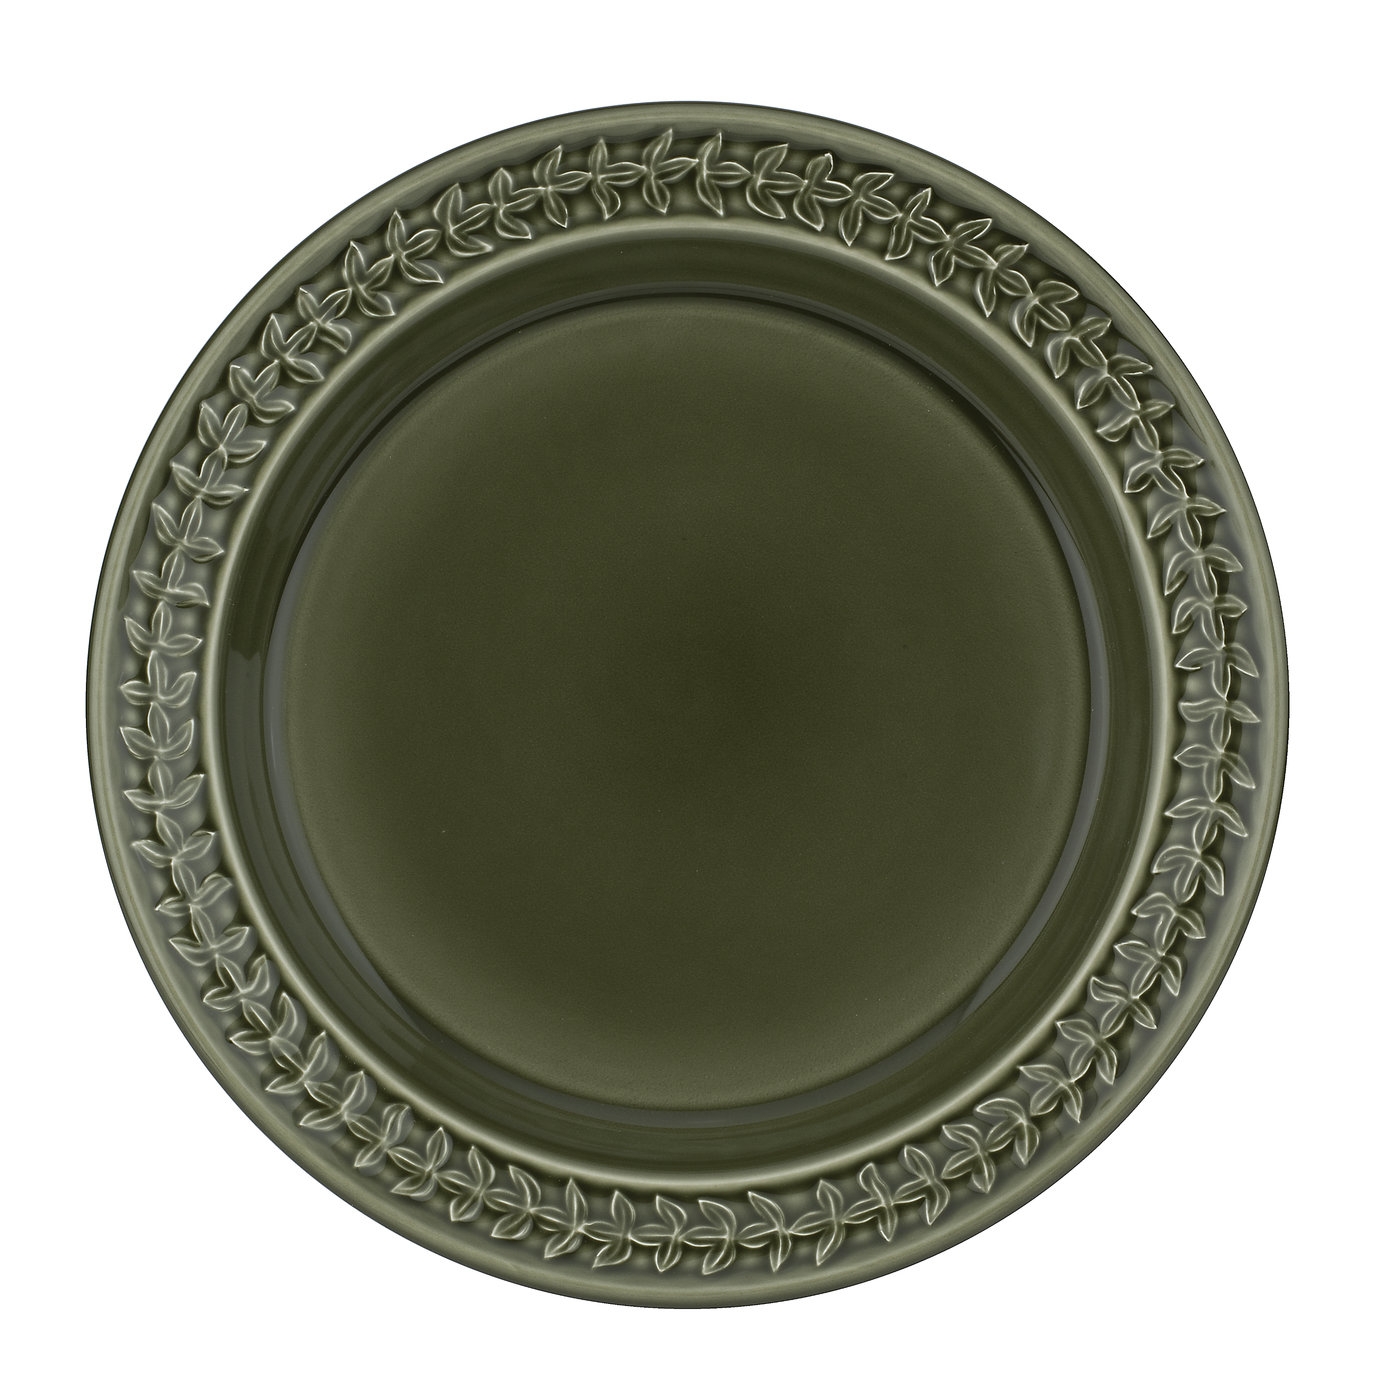 Botanic Garden Harmony Salad Plate, Forest Green image number null